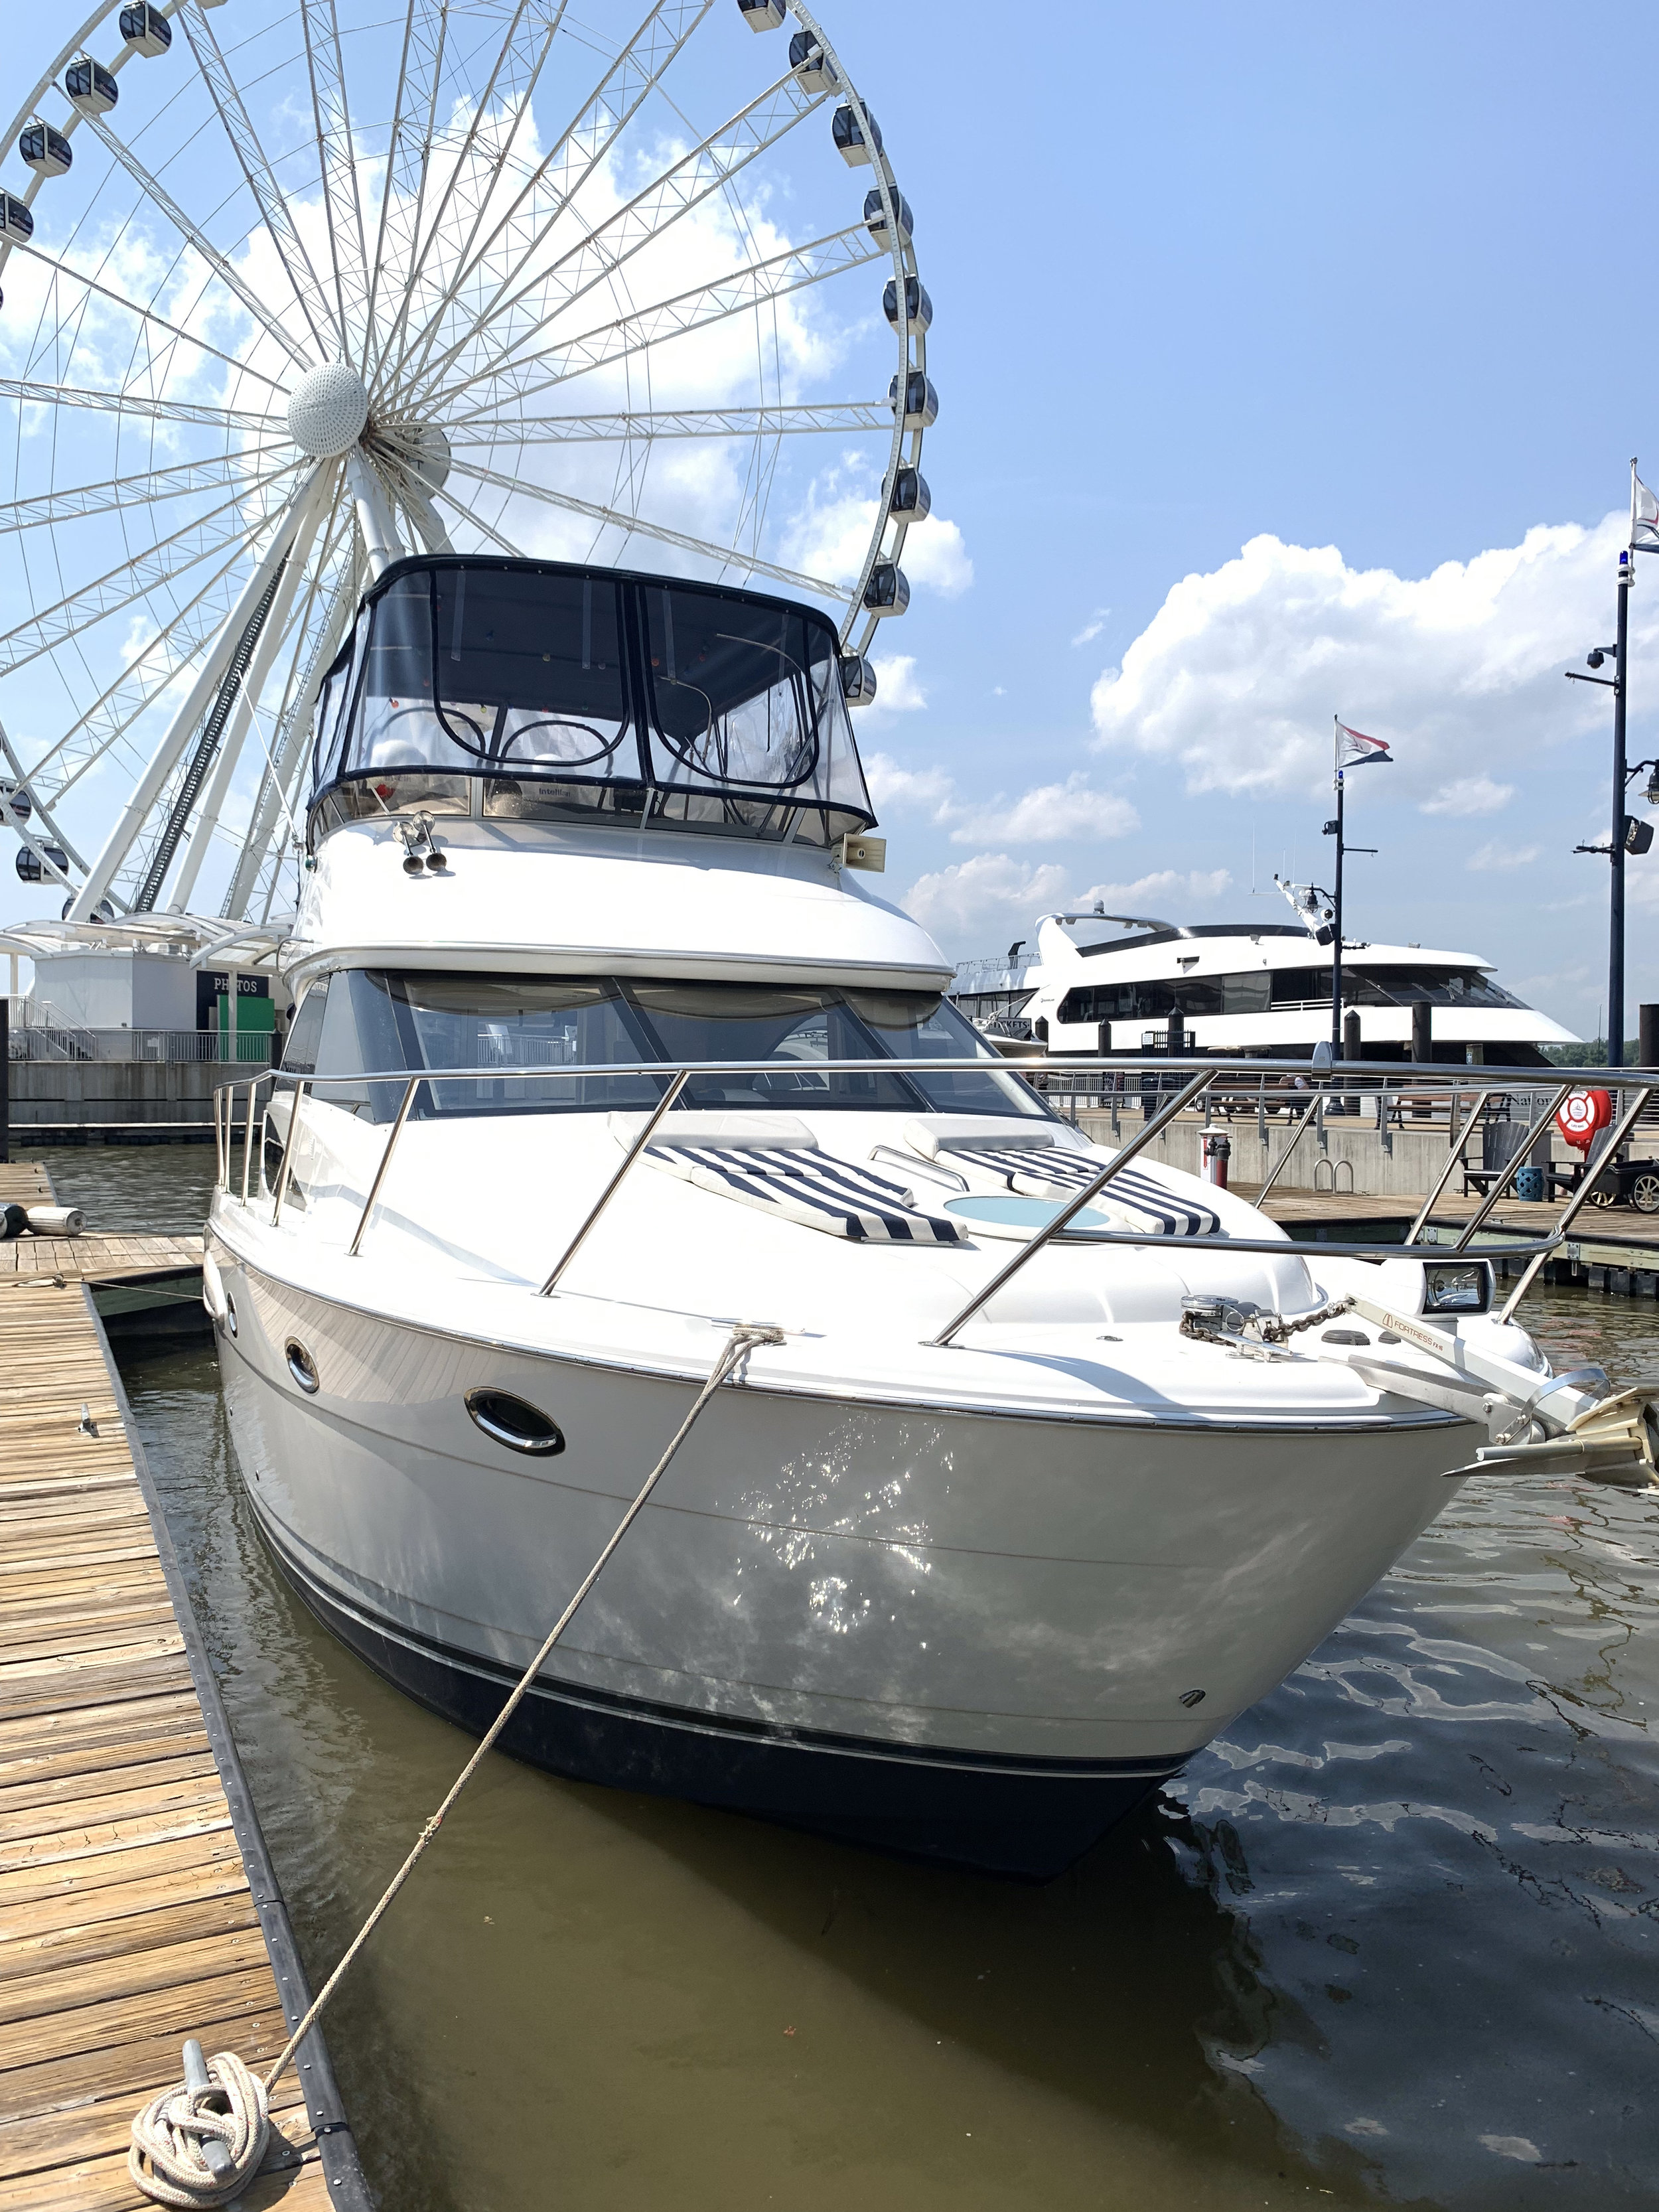 Bow view, National Harbor